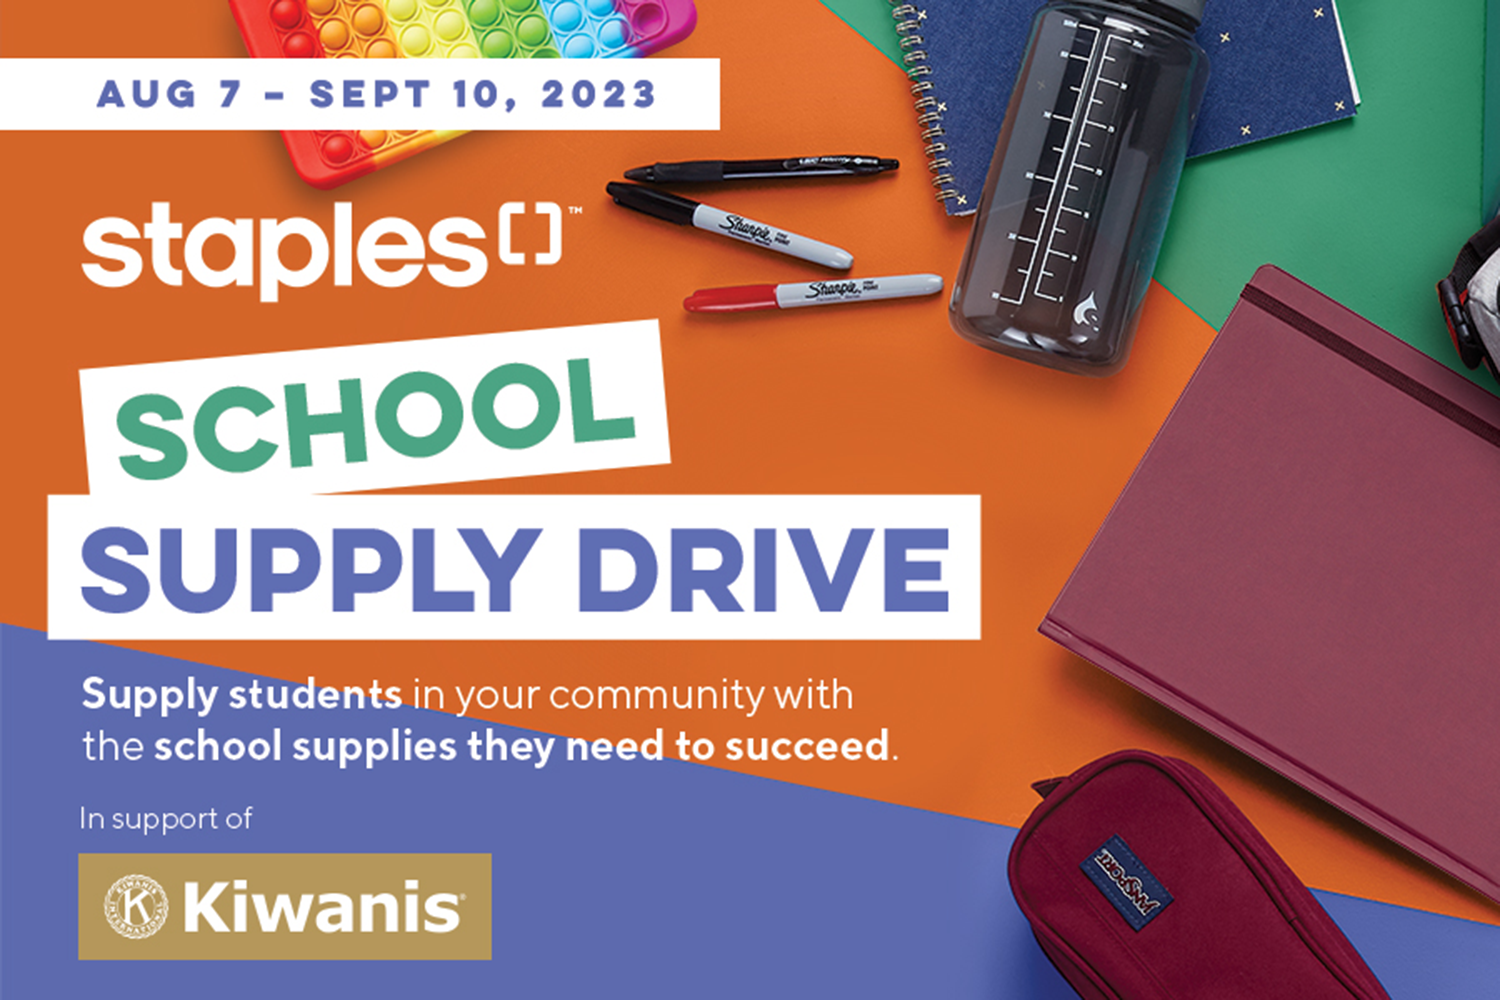 Charity partners with Staples Canada on Back to School 2021